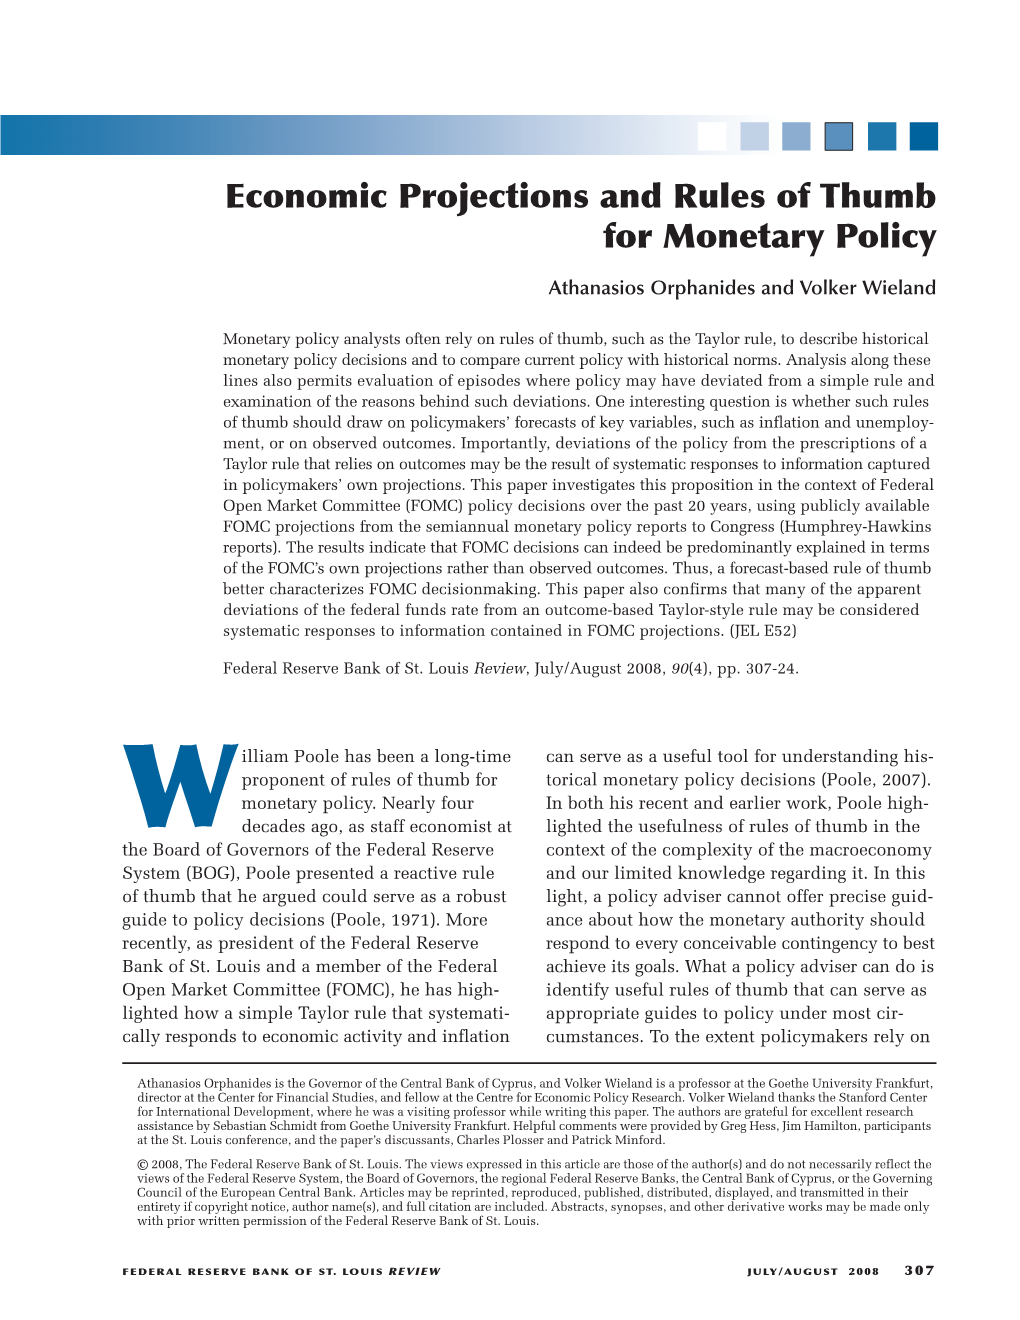 Economic Projections and Rules of Thumb for Monetary Policy